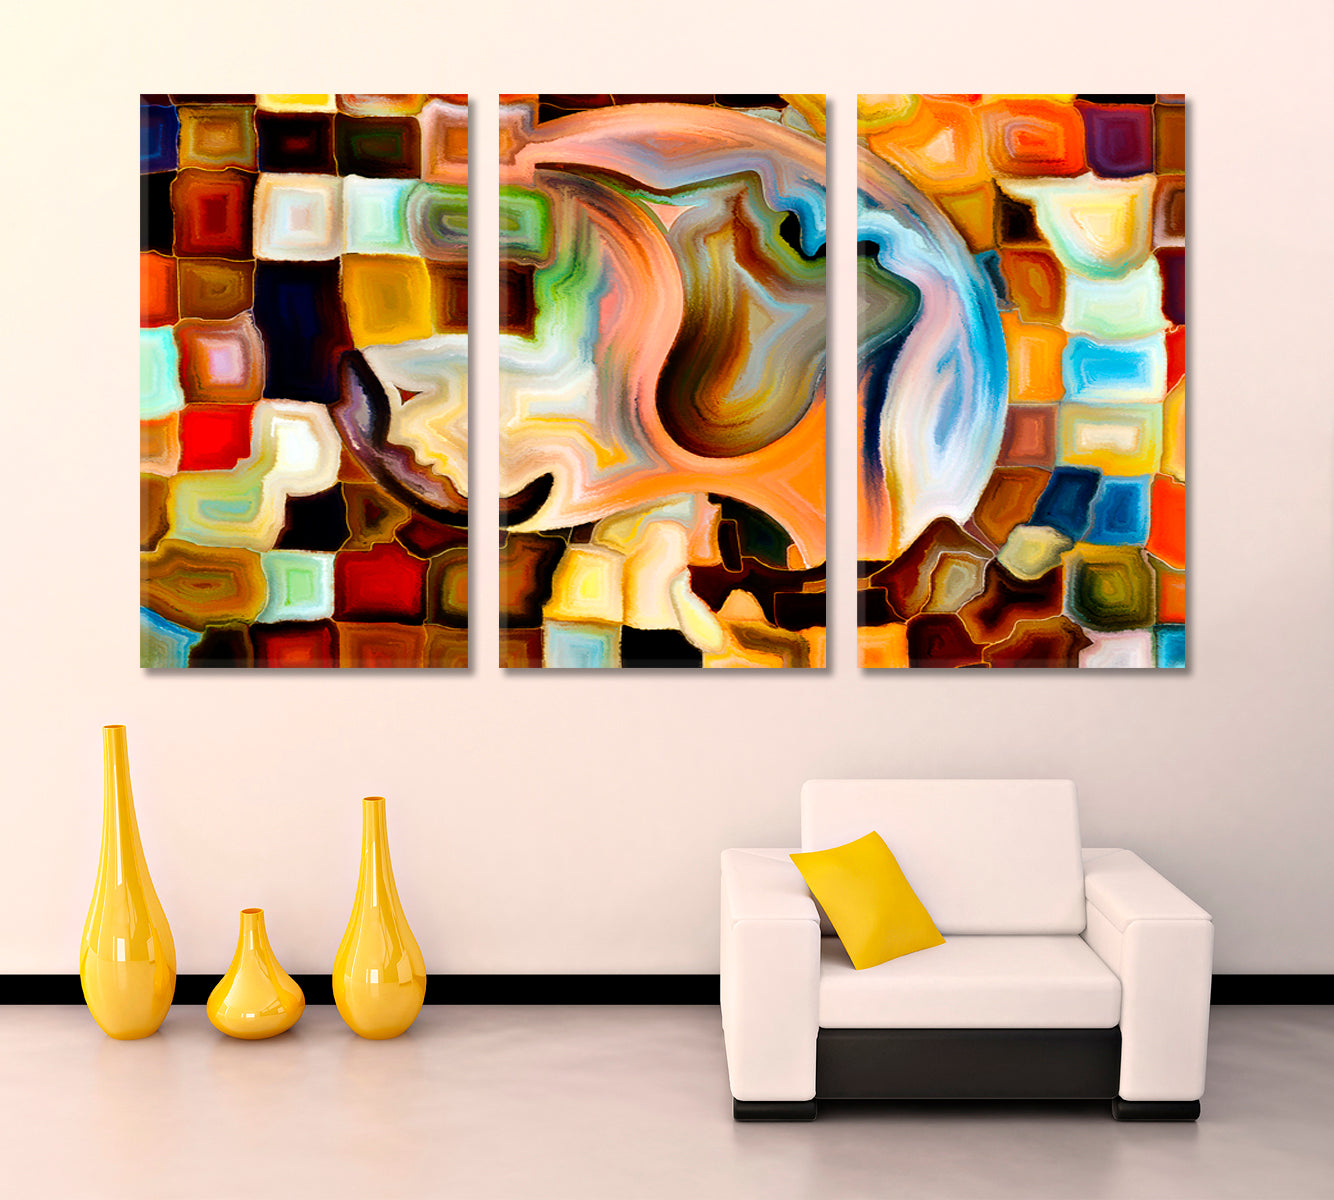 MIND COLORS Consciousness Abstract Art Print Artesty 3 panels 36" x 24" 